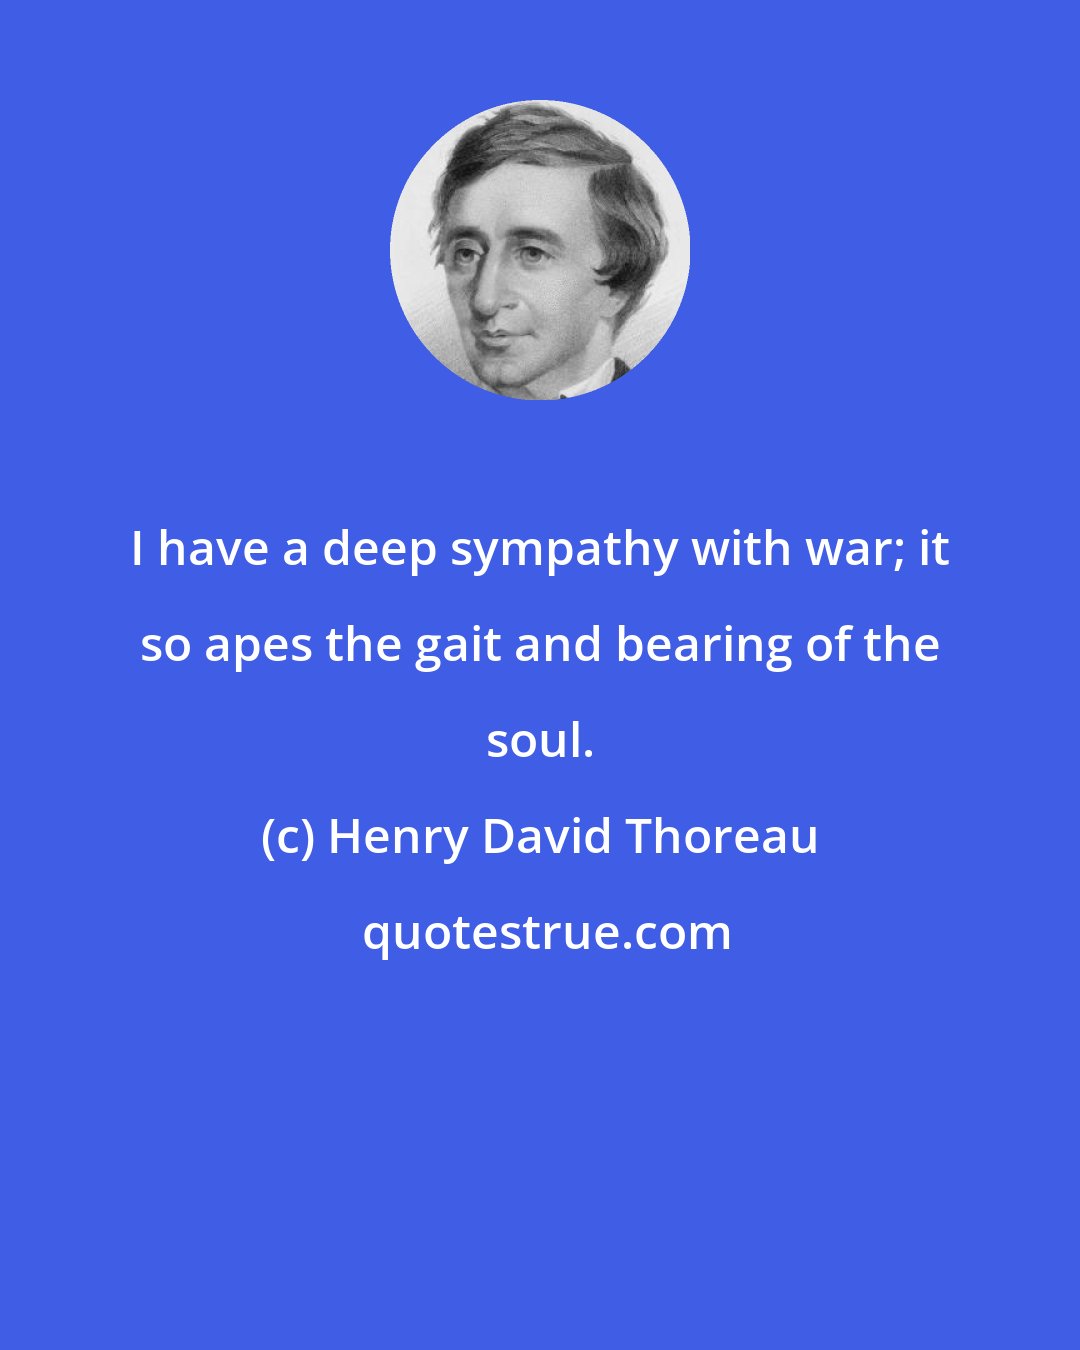 Henry David Thoreau: I have a deep sympathy with war; it so apes the gait and bearing of the soul.